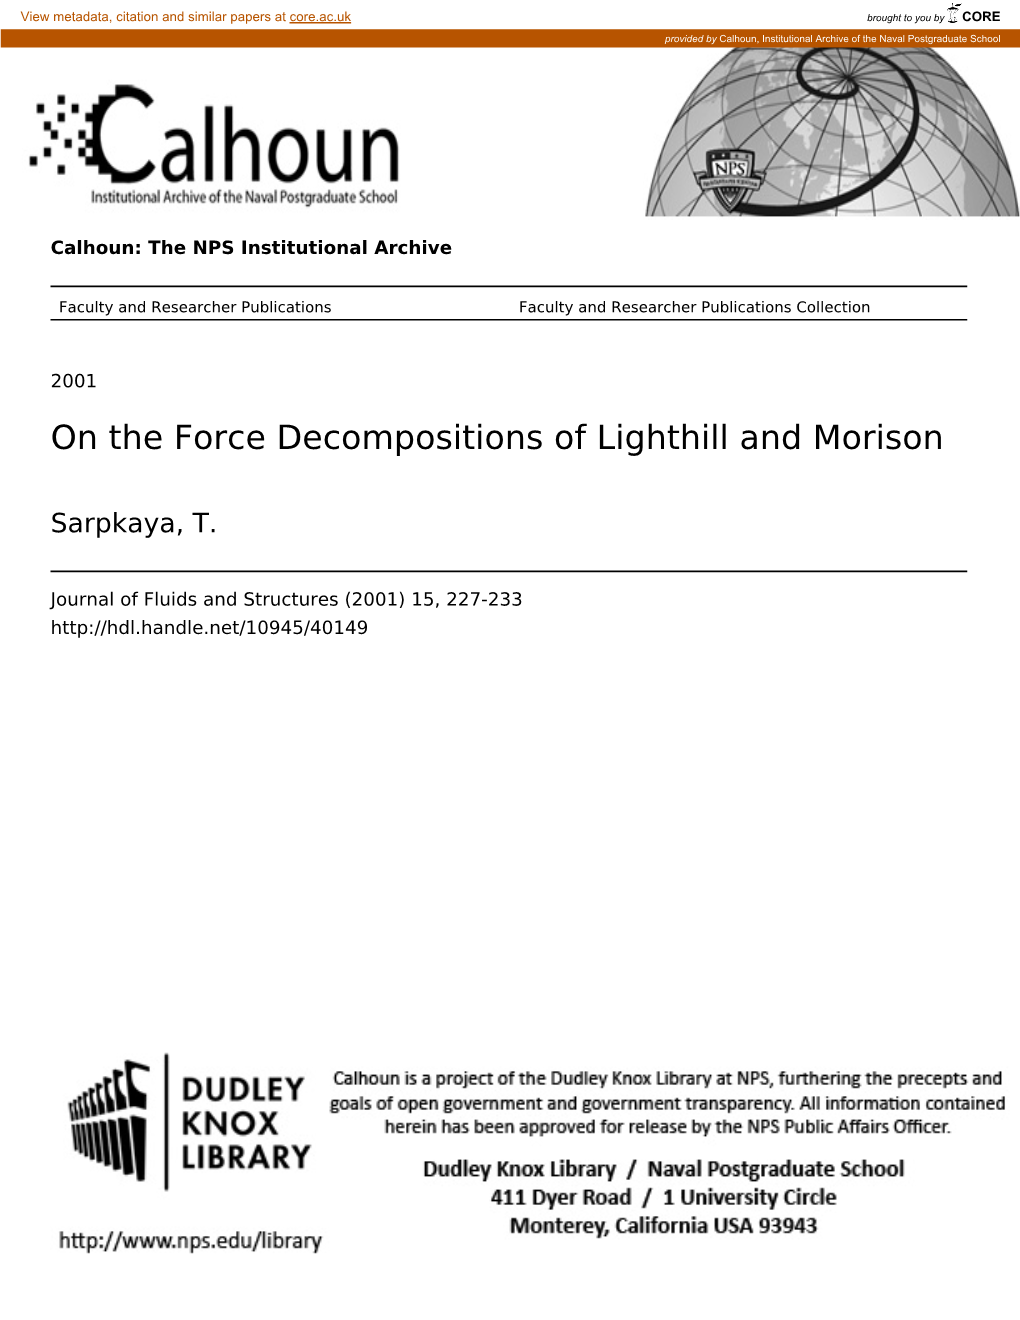 On the Force Decompositions of Lighthill and Morison